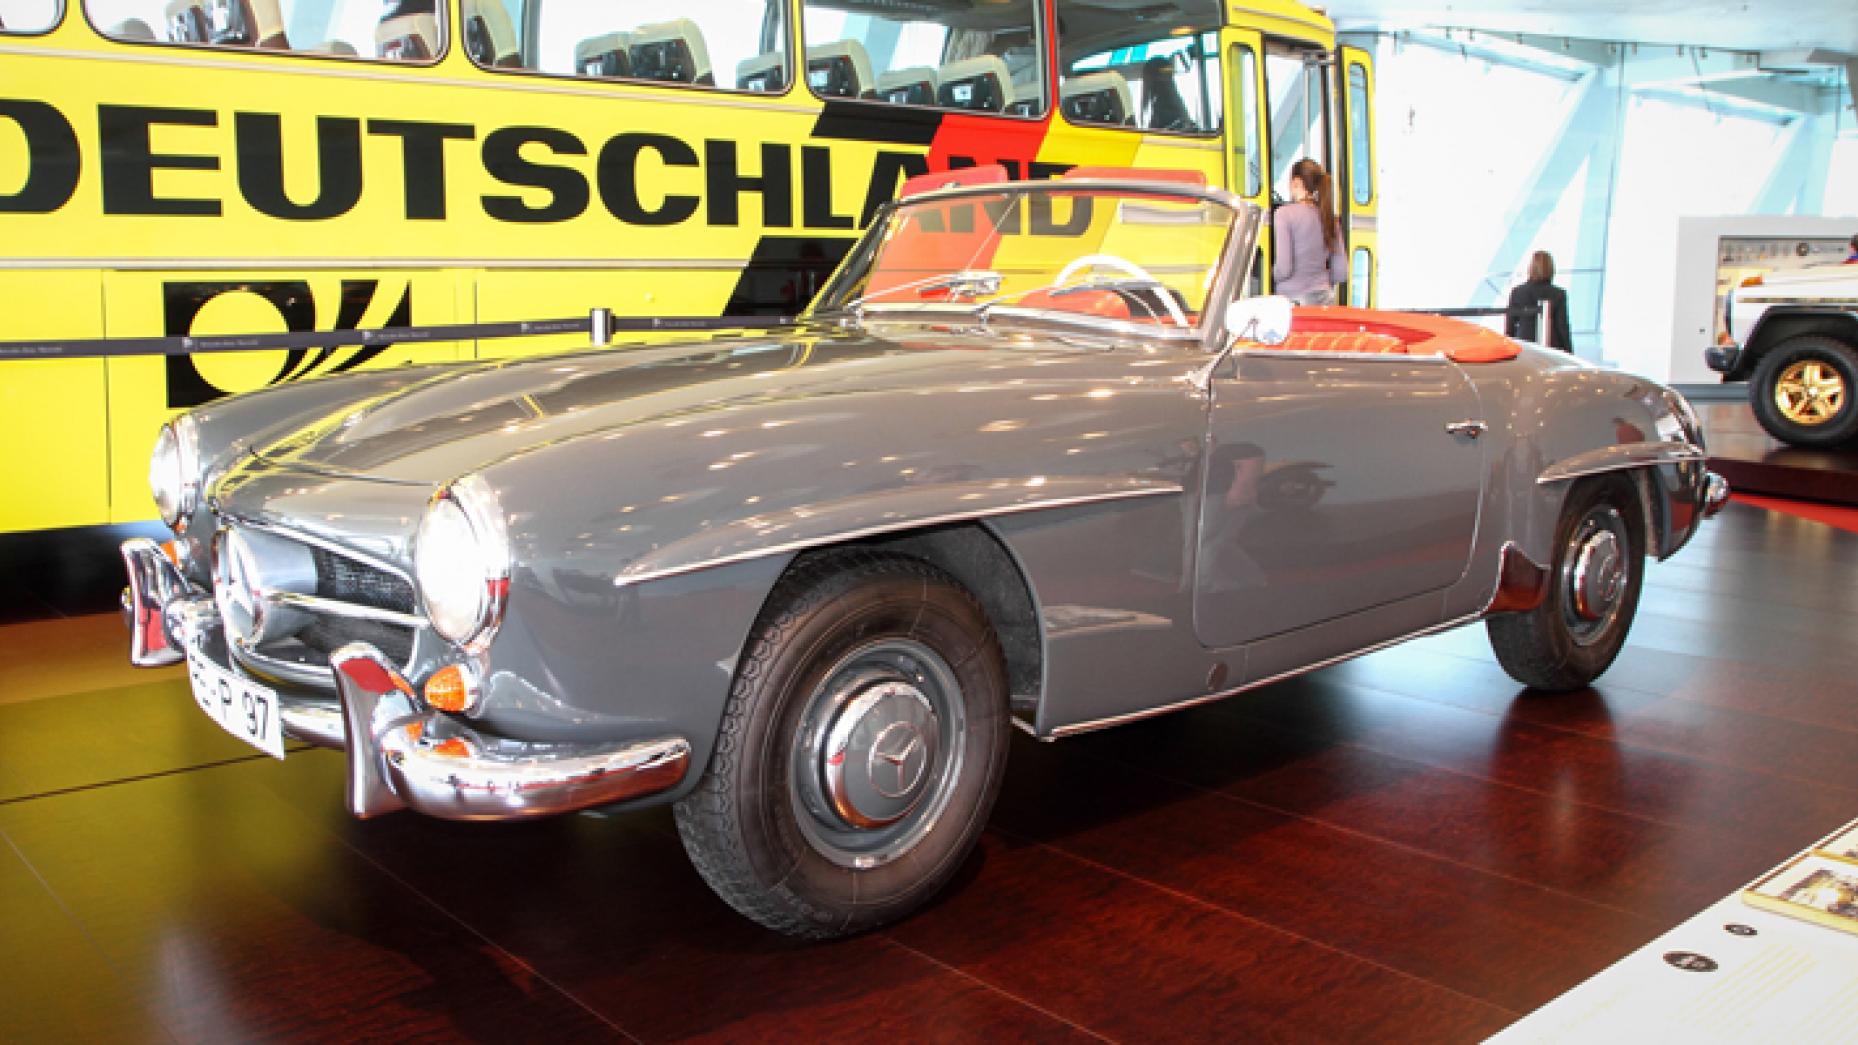 1958 MERCEDES-BENZ 190 SL: The little brother to the dreamboat that was the 300 SL was no less a car for it, counting Grace Kelly and Zsa Zsa Gabor among its clientele. A four-pot 1.8-litre petrol engine was nestled underneath, producing just over 100bhp.